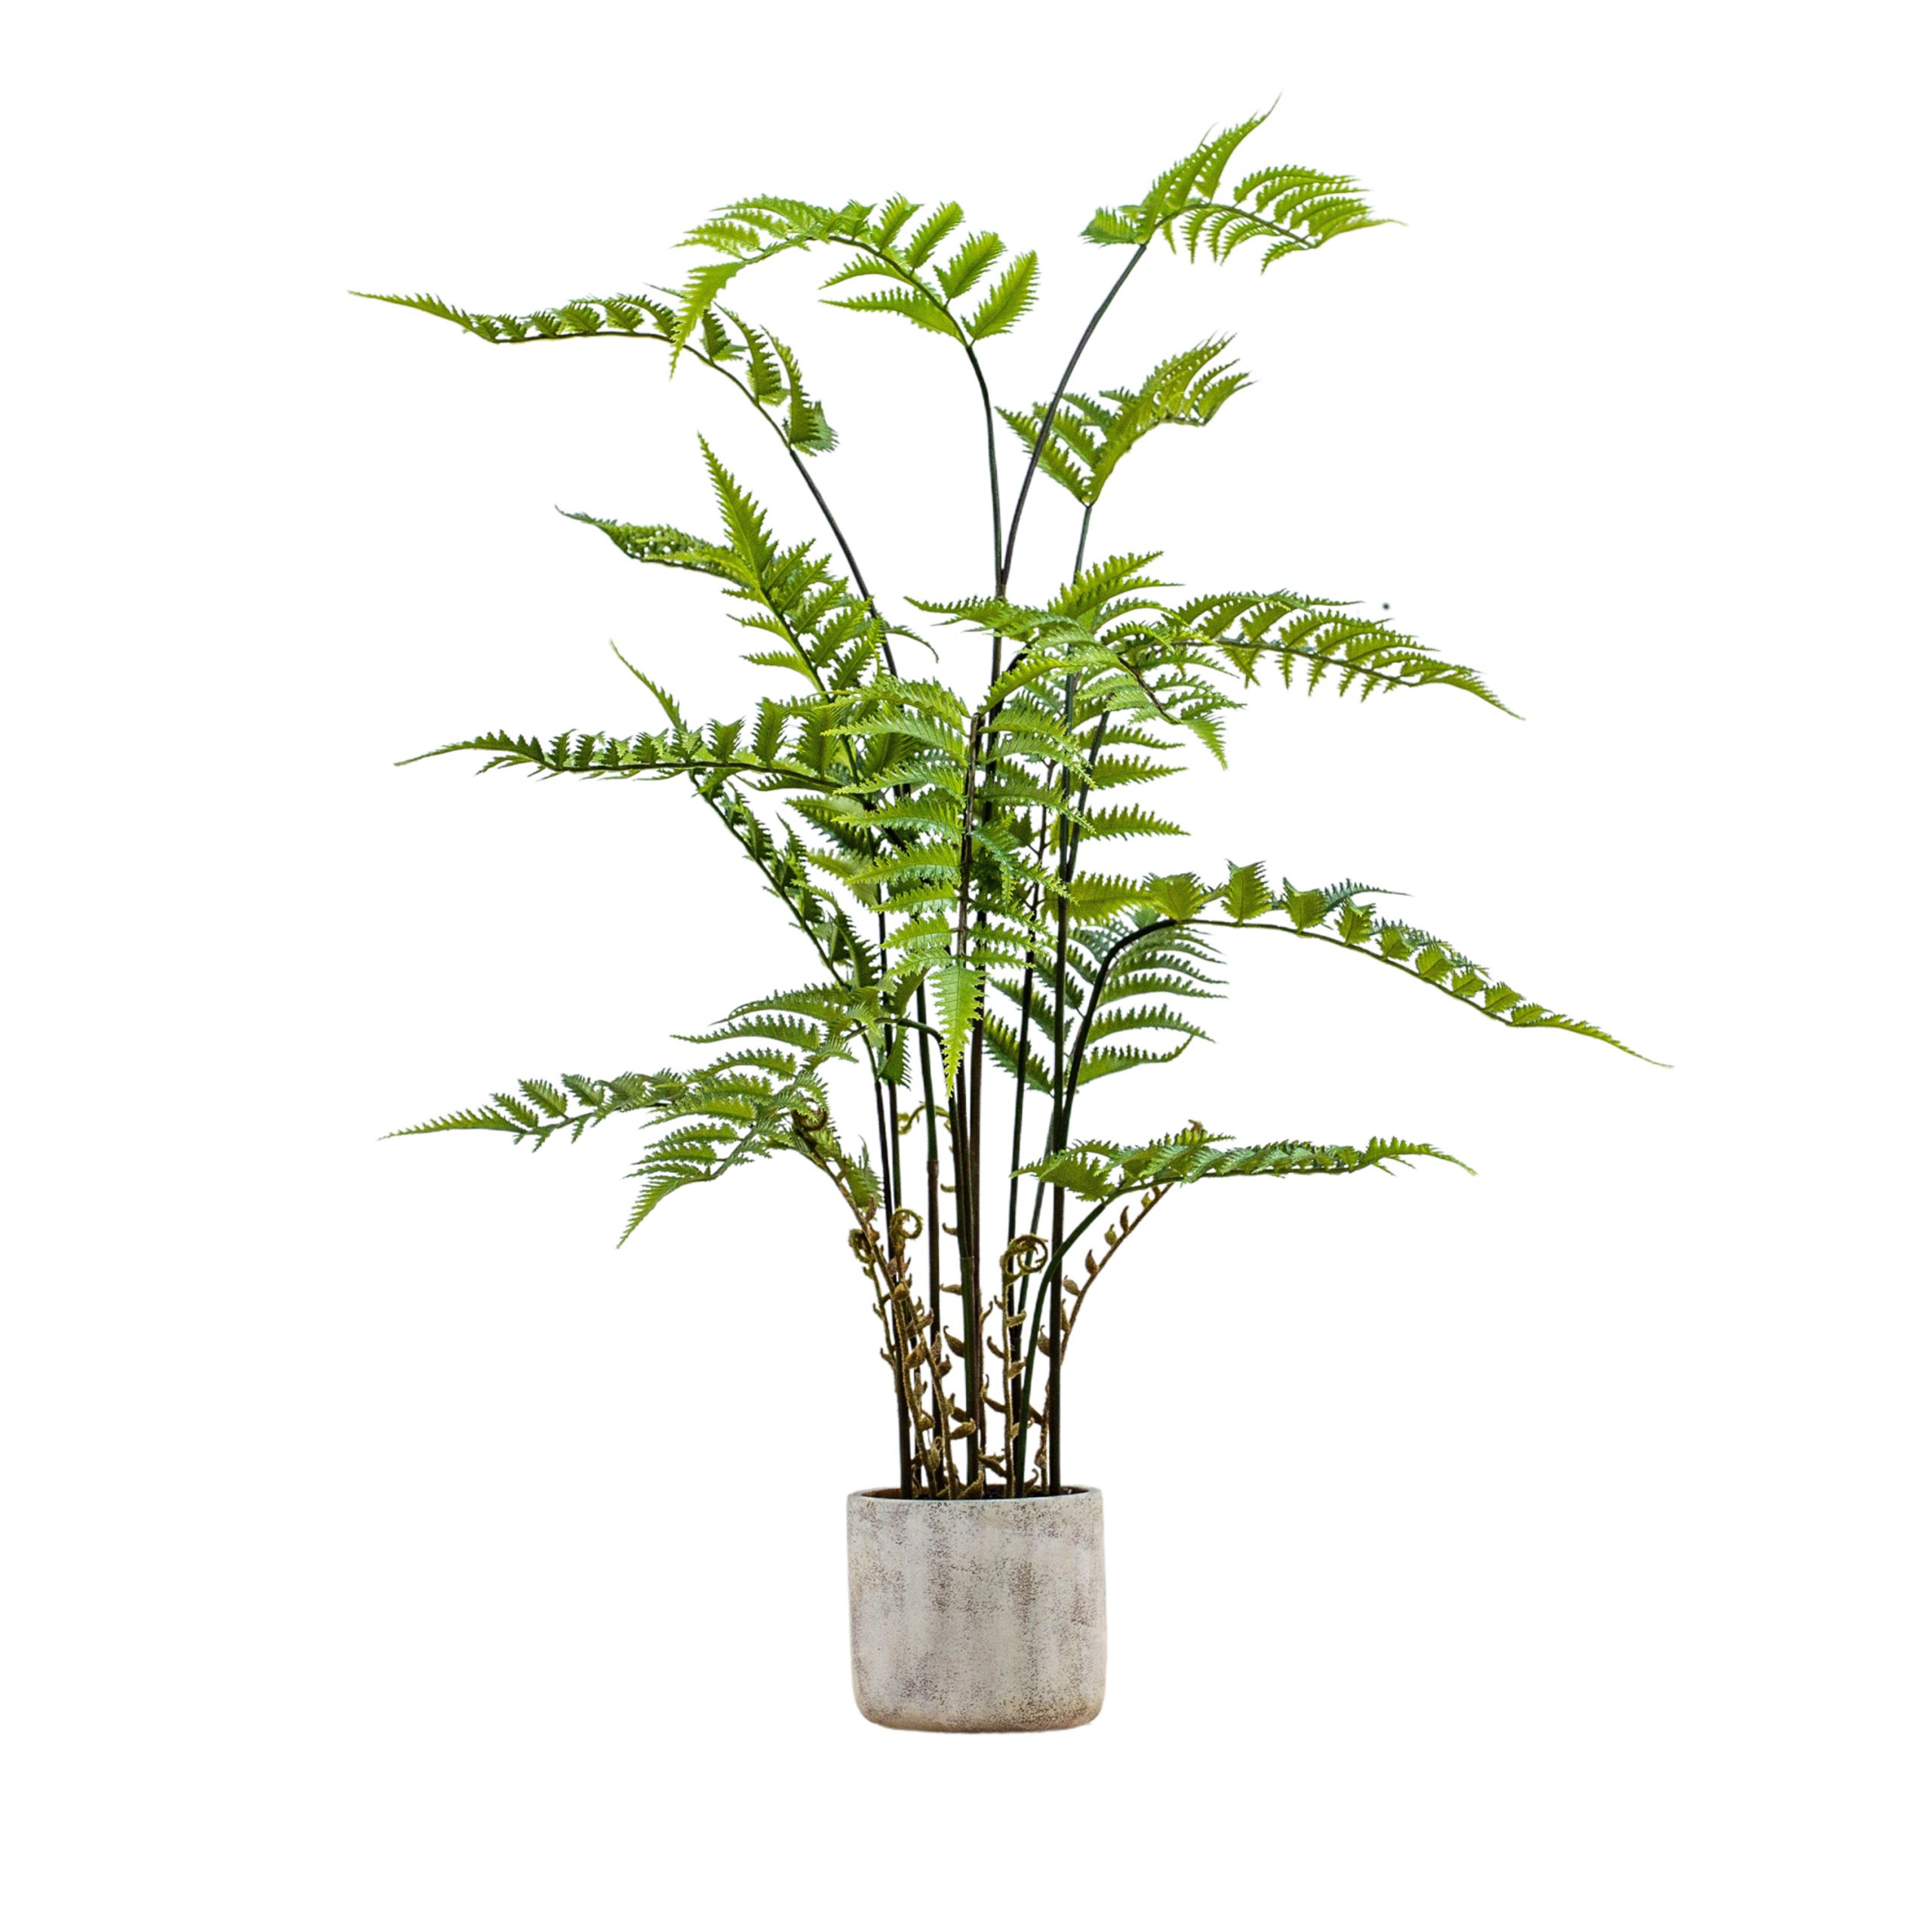 Gallery Direct Potted Fern in Cement Pot | Shackletons